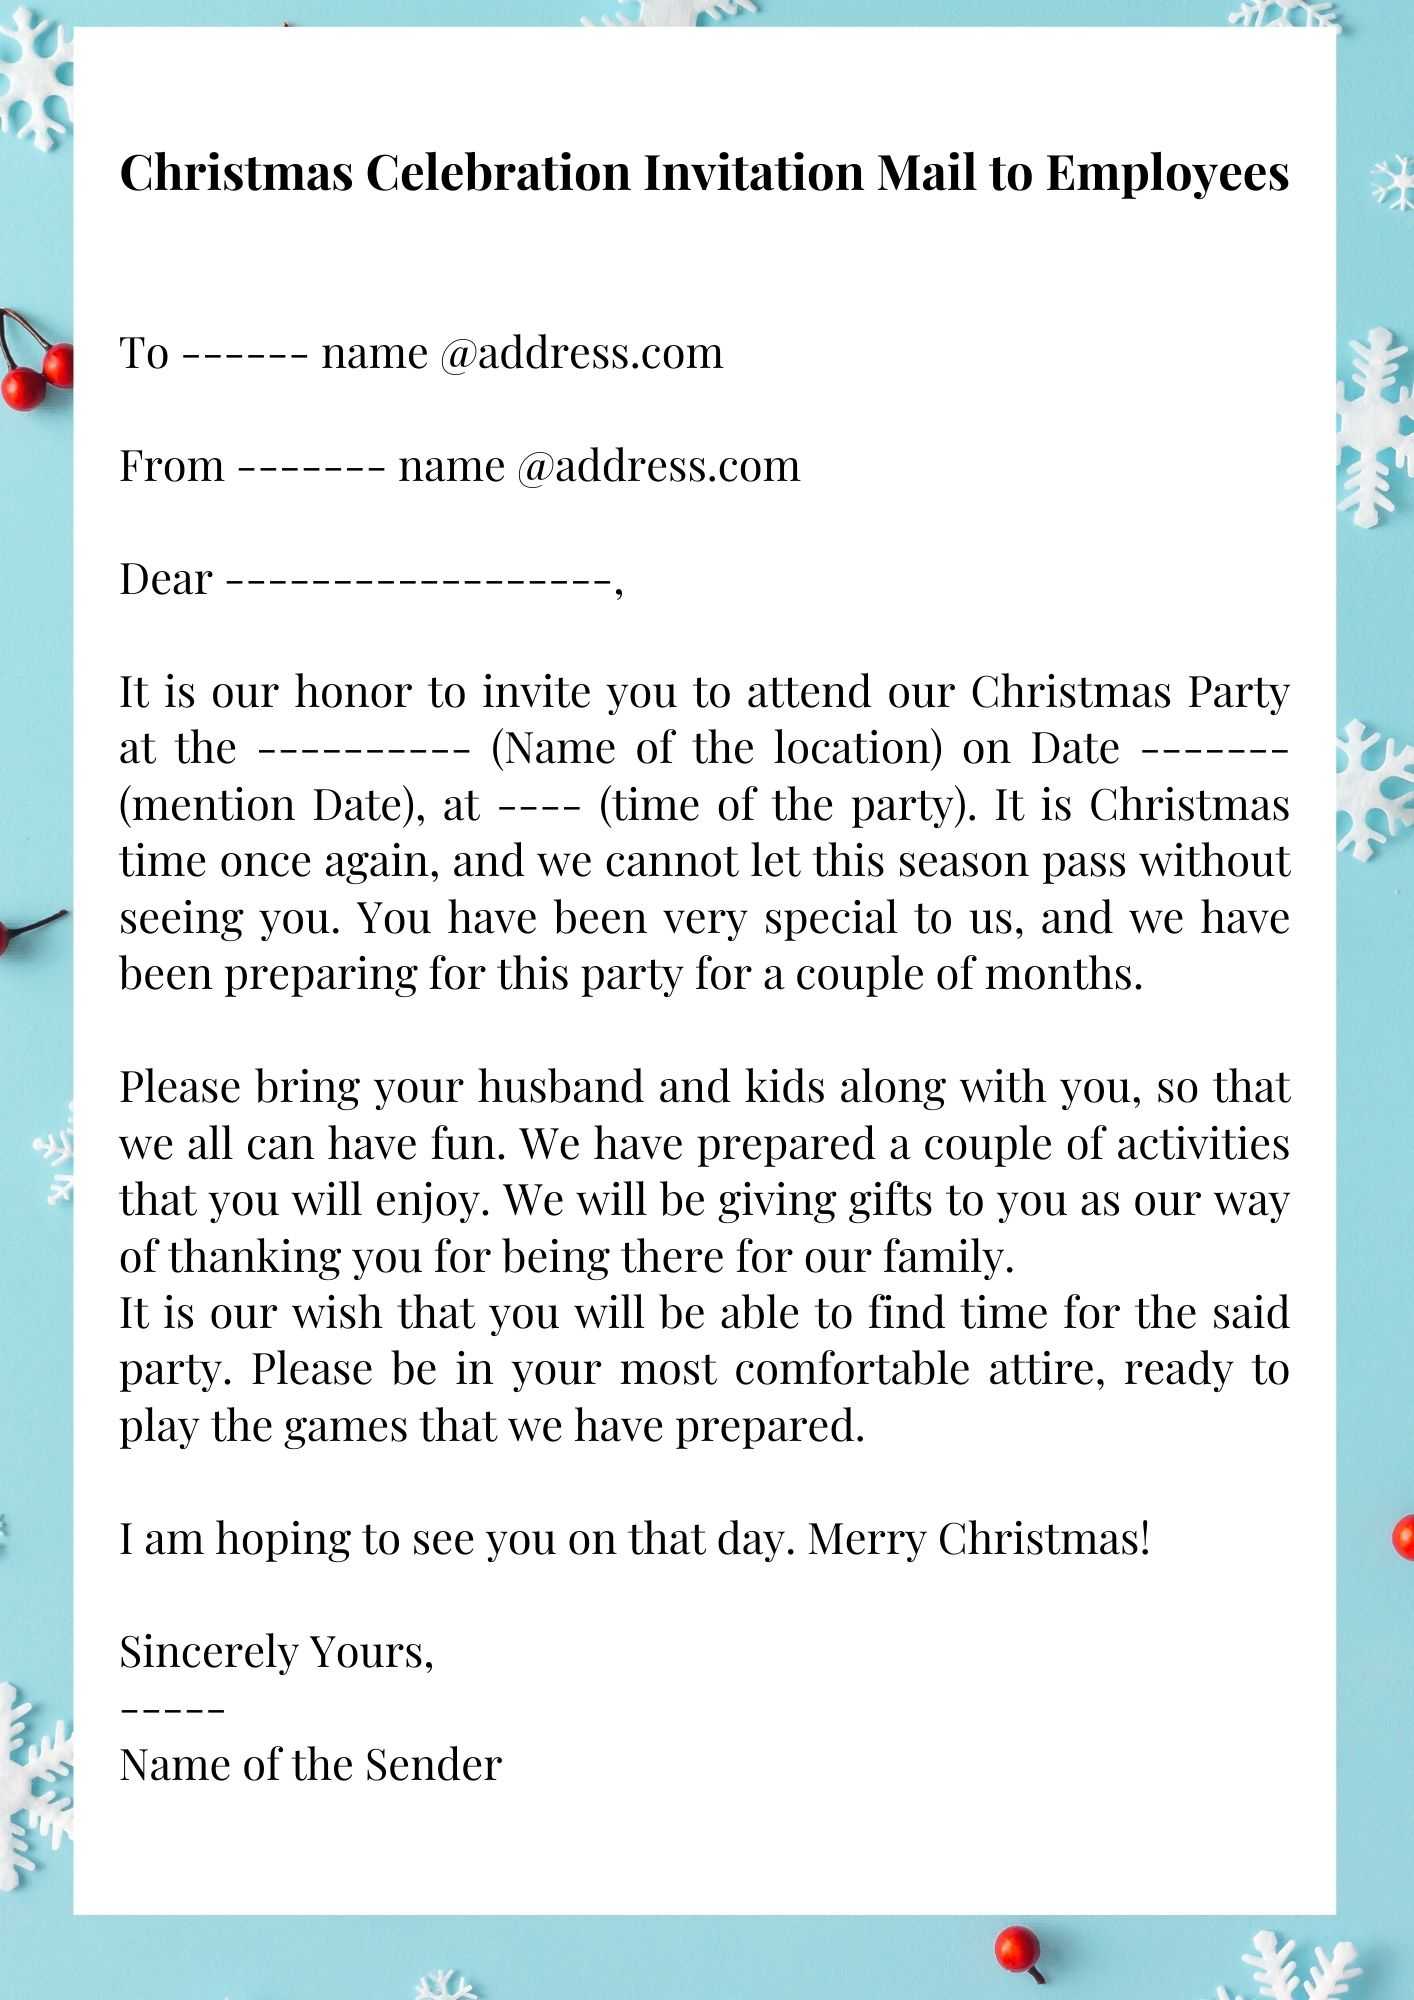 Christmas Party Invitation Letter with Sample and Examples